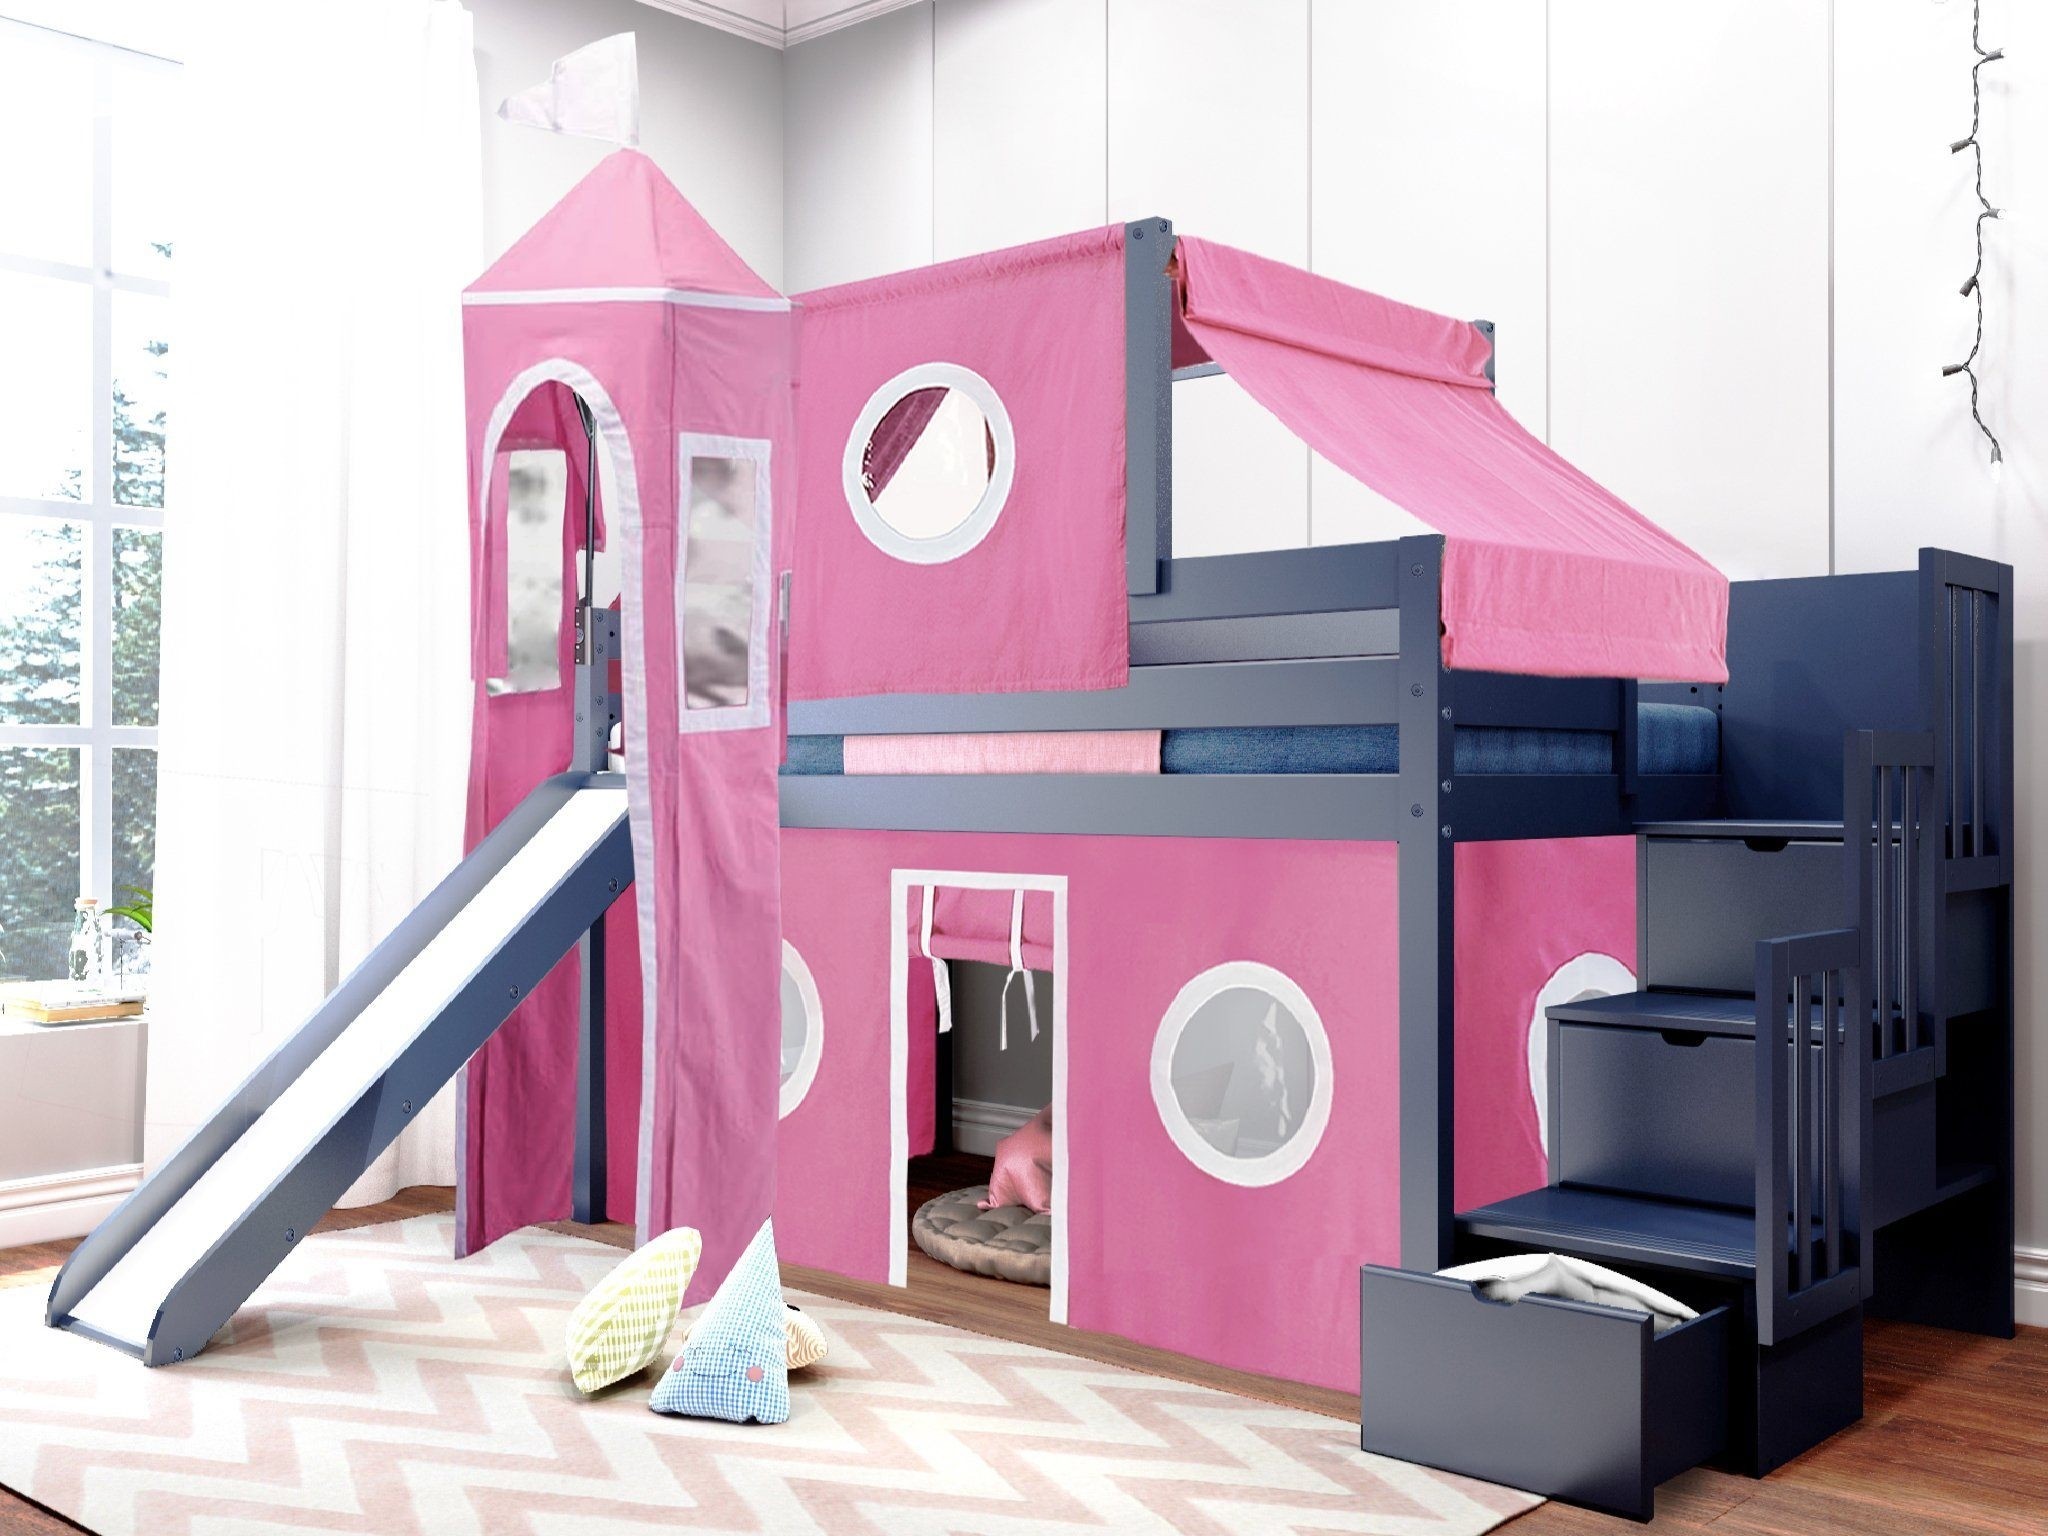 Jackpot princess low loft stairway bed with slide pink 1